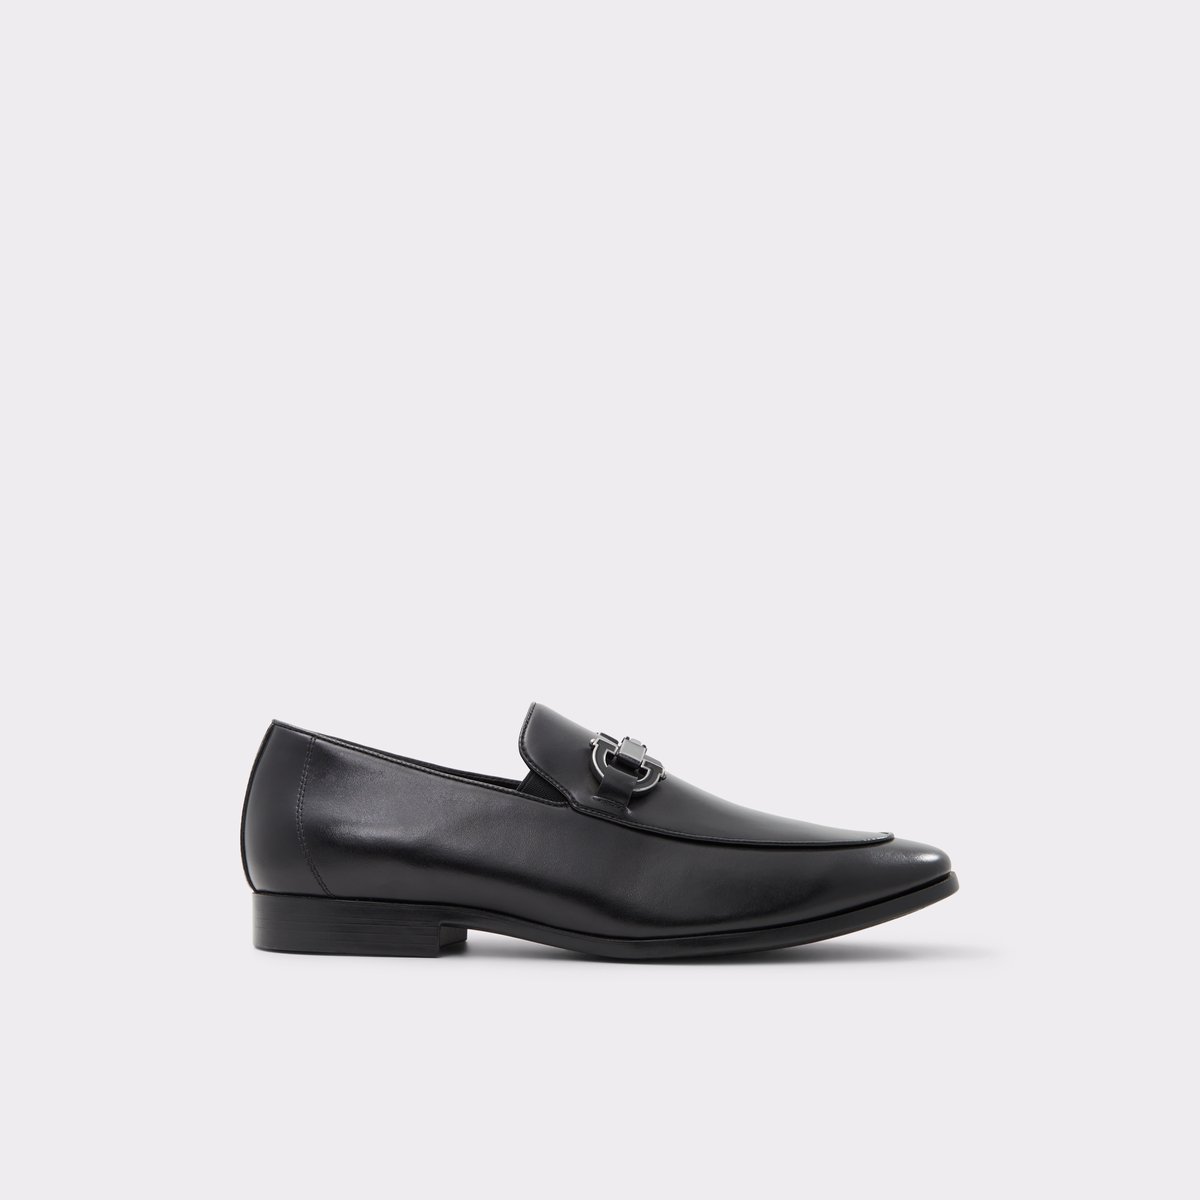 Bolton Black Leather Smooth Men's Loafers & Slip-Ons | ALDO Canada